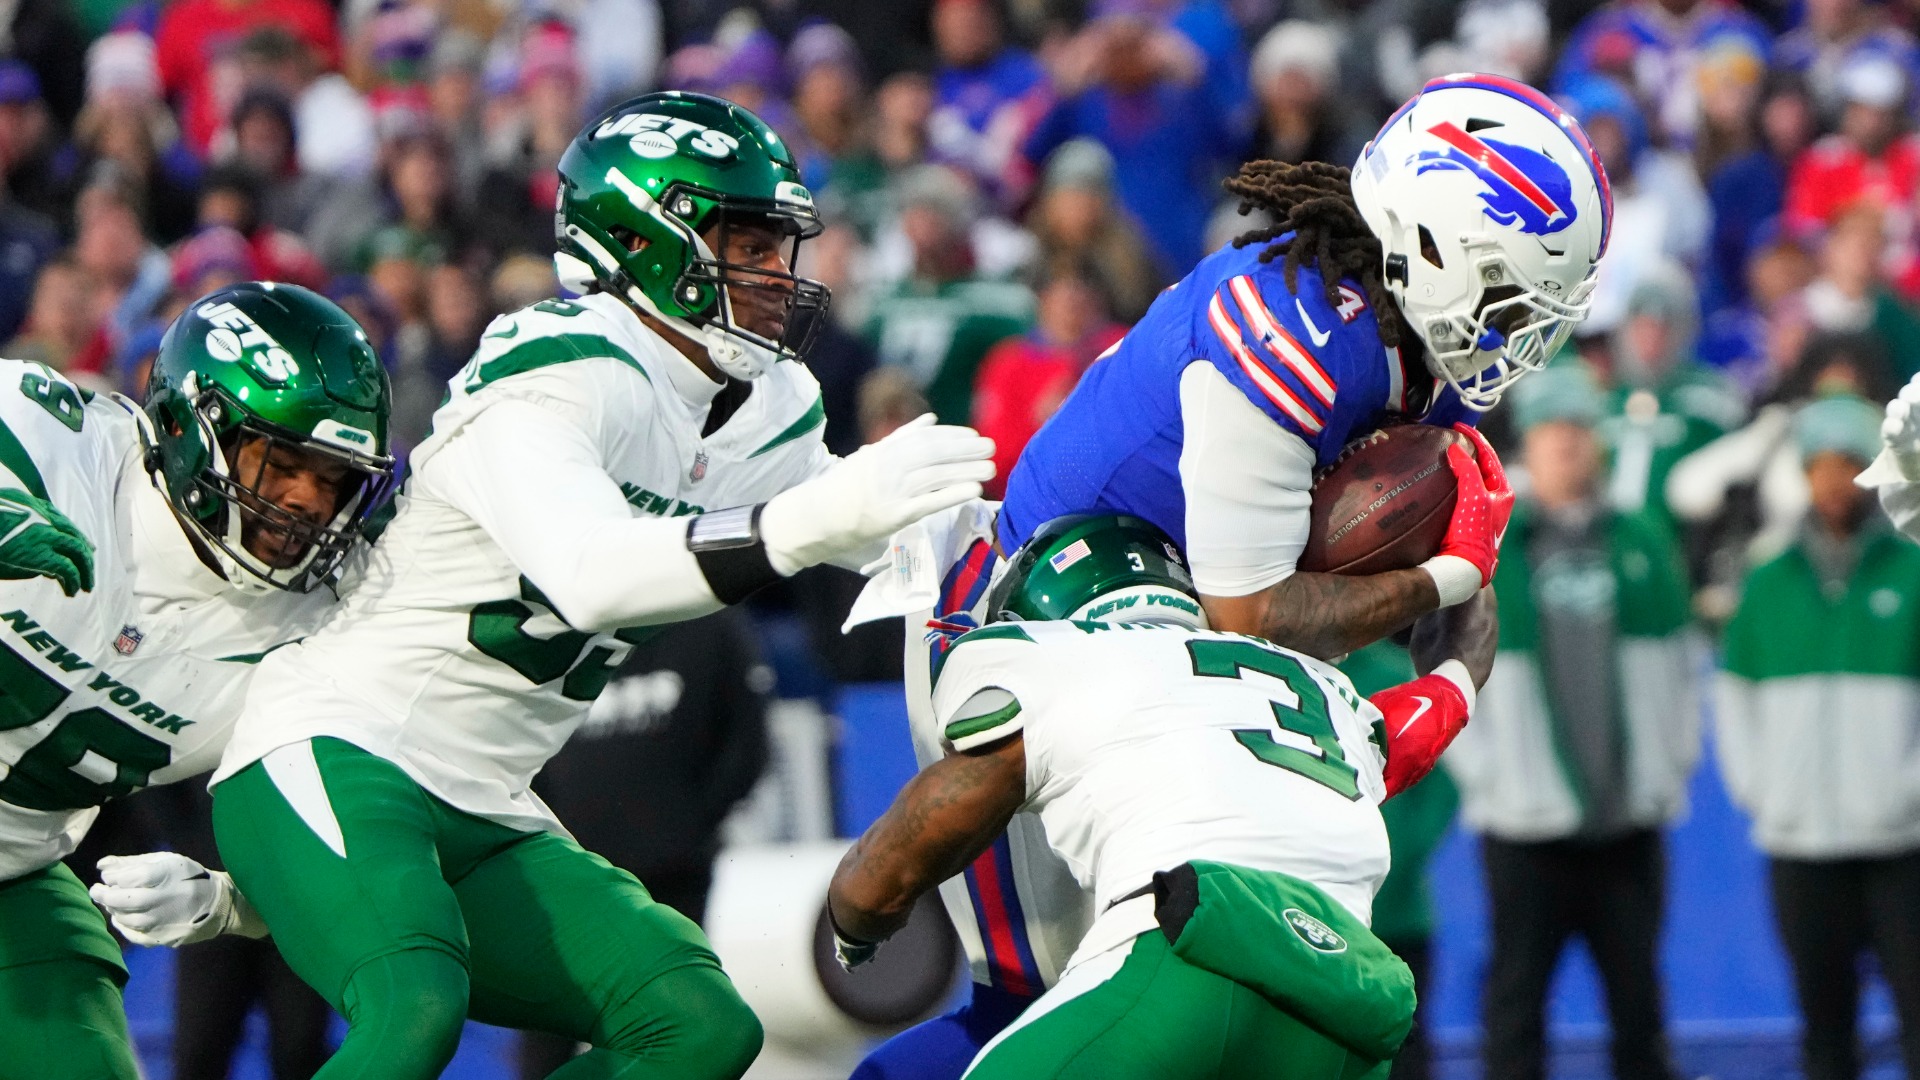 Fight Reportedly Breaks Out In Tunnel After Jets-Bills Game